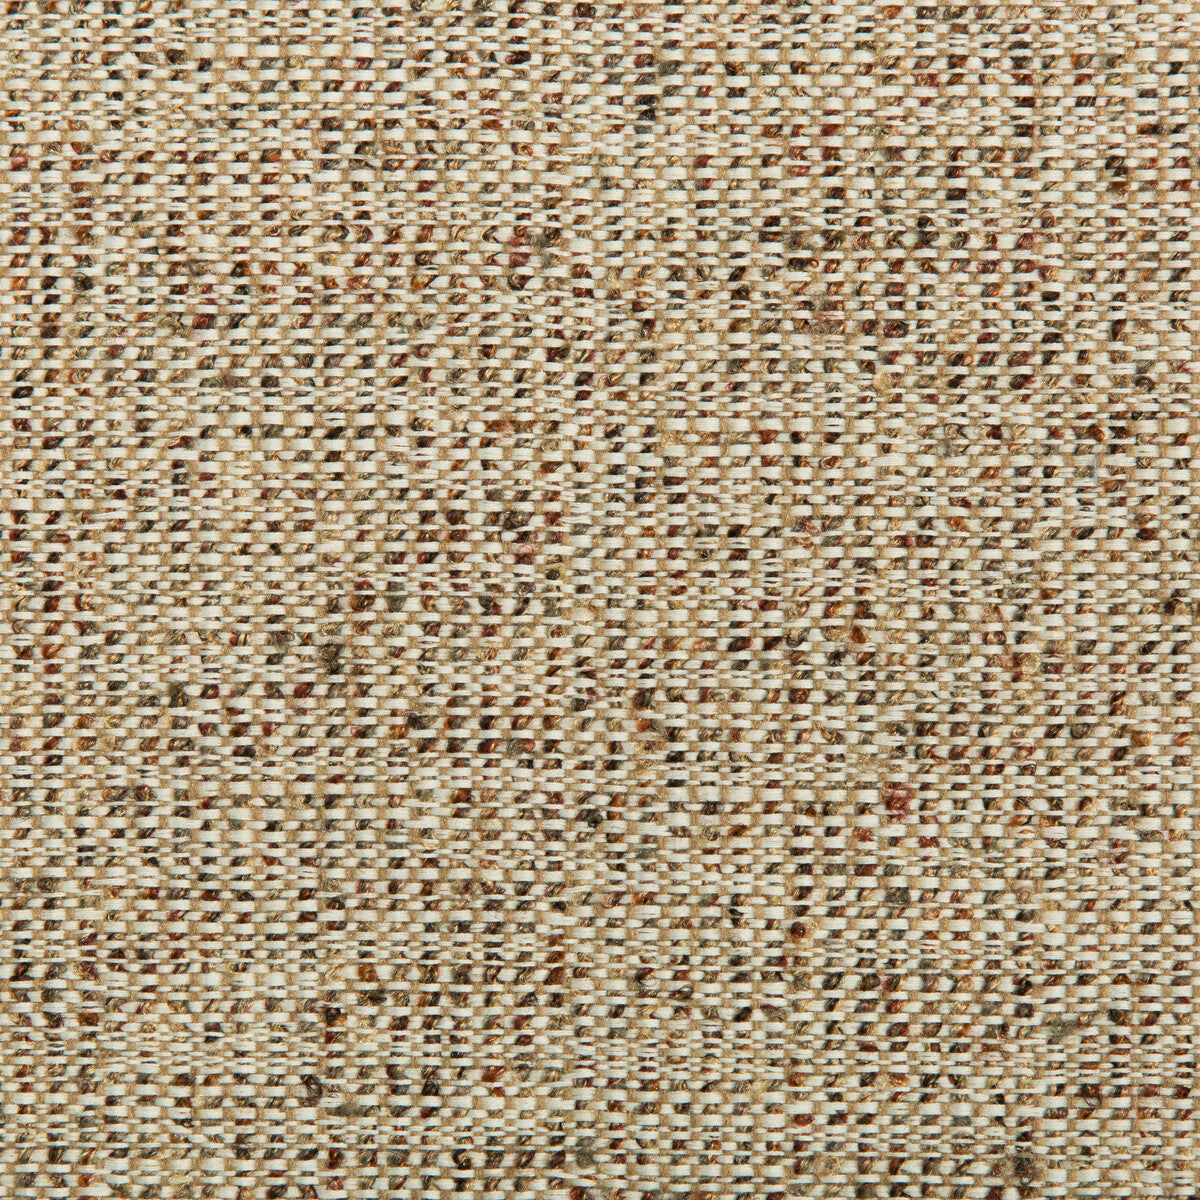 Kravet Contract fabric in 34635-916 color - pattern 34635.916.0 - by Kravet Contract in the Crypton Incase collection